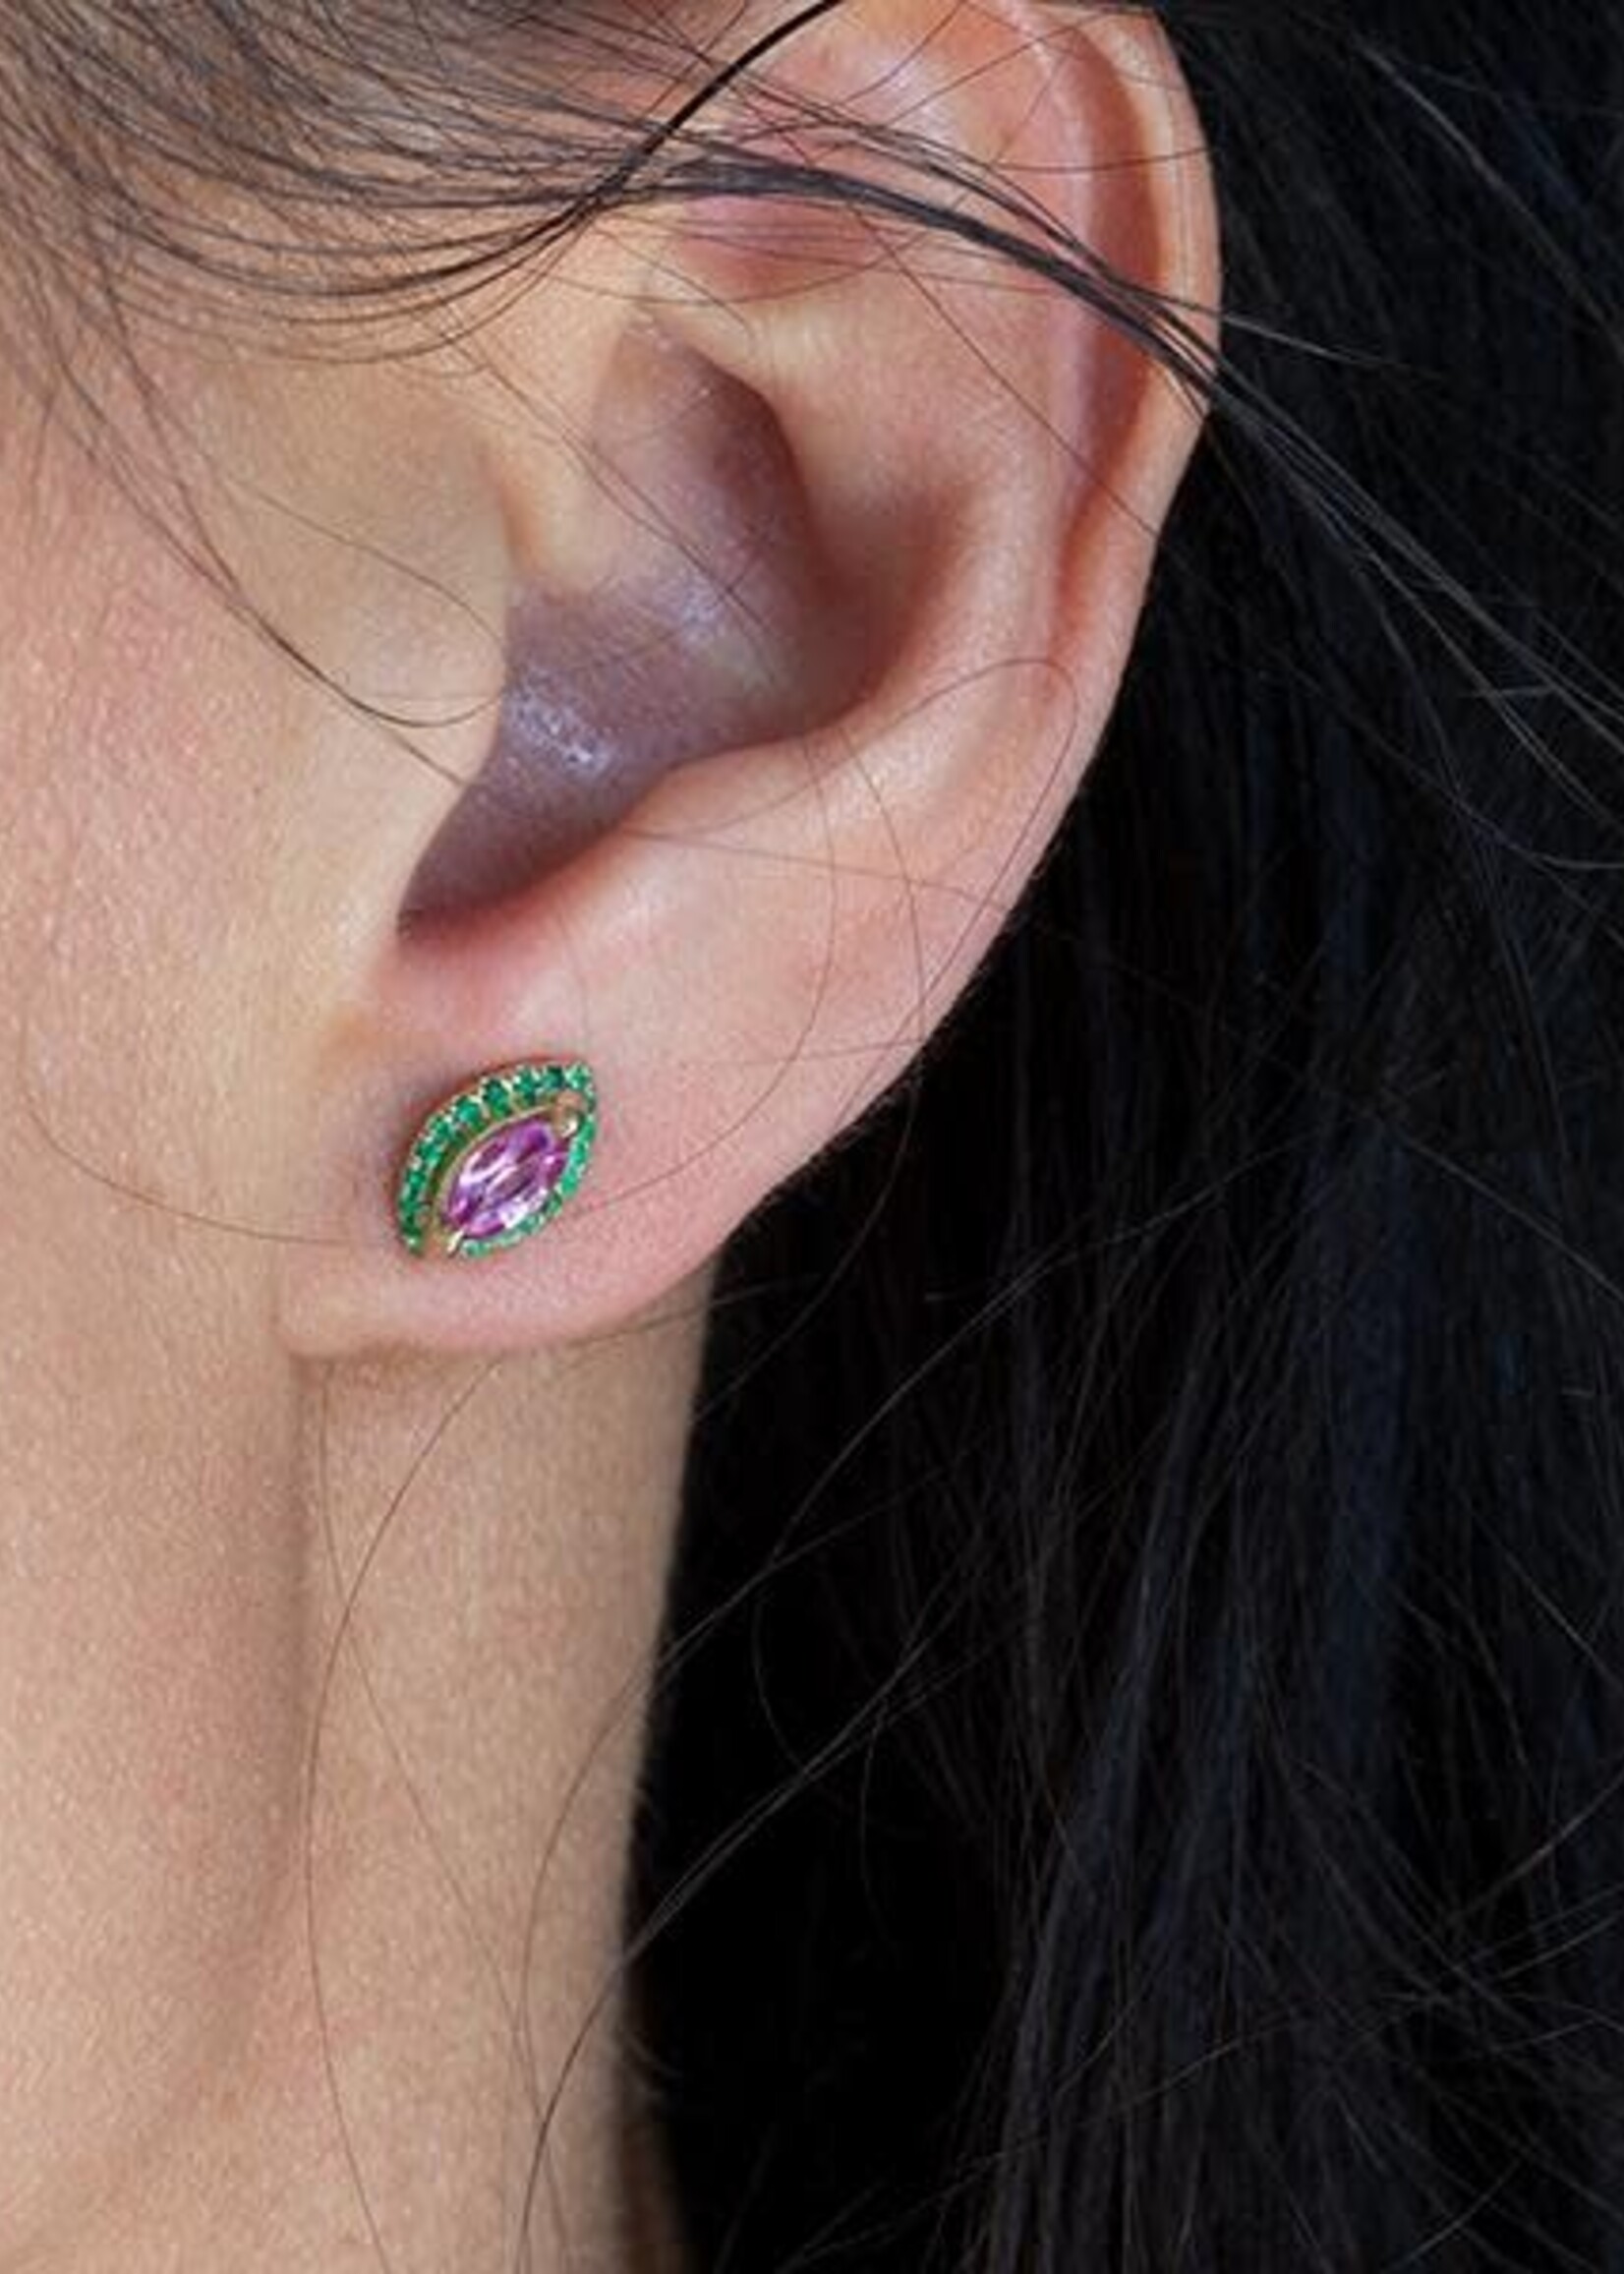 Katie Finn Gold Pink Sapphire and Emerald Stud Earrings